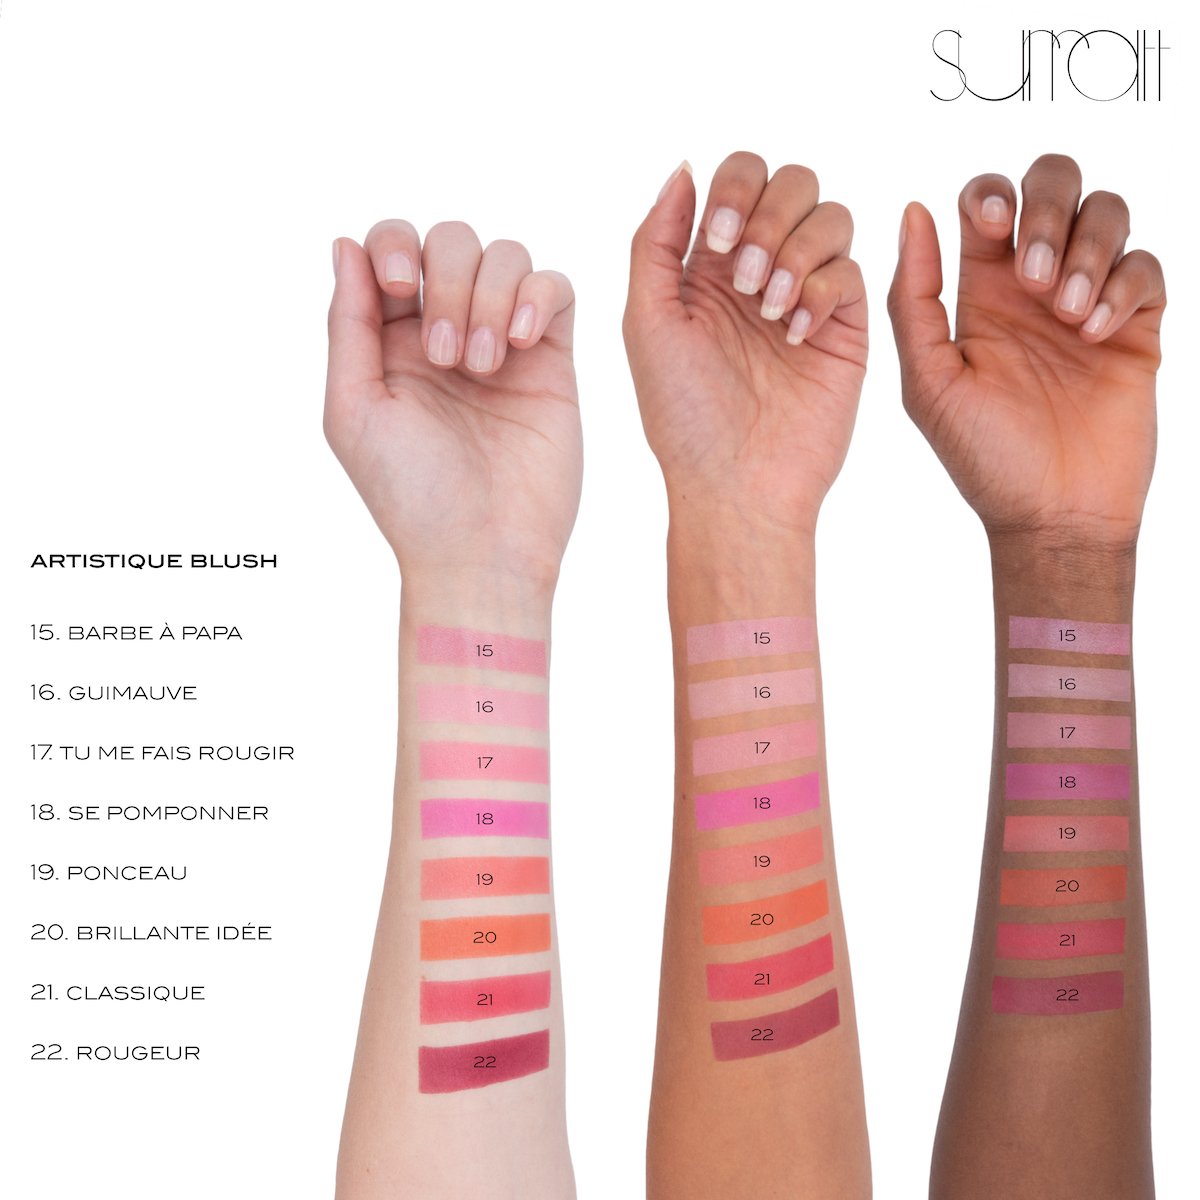 ALLVAR - powder blush, highlight and contour swatches on various skin tones 